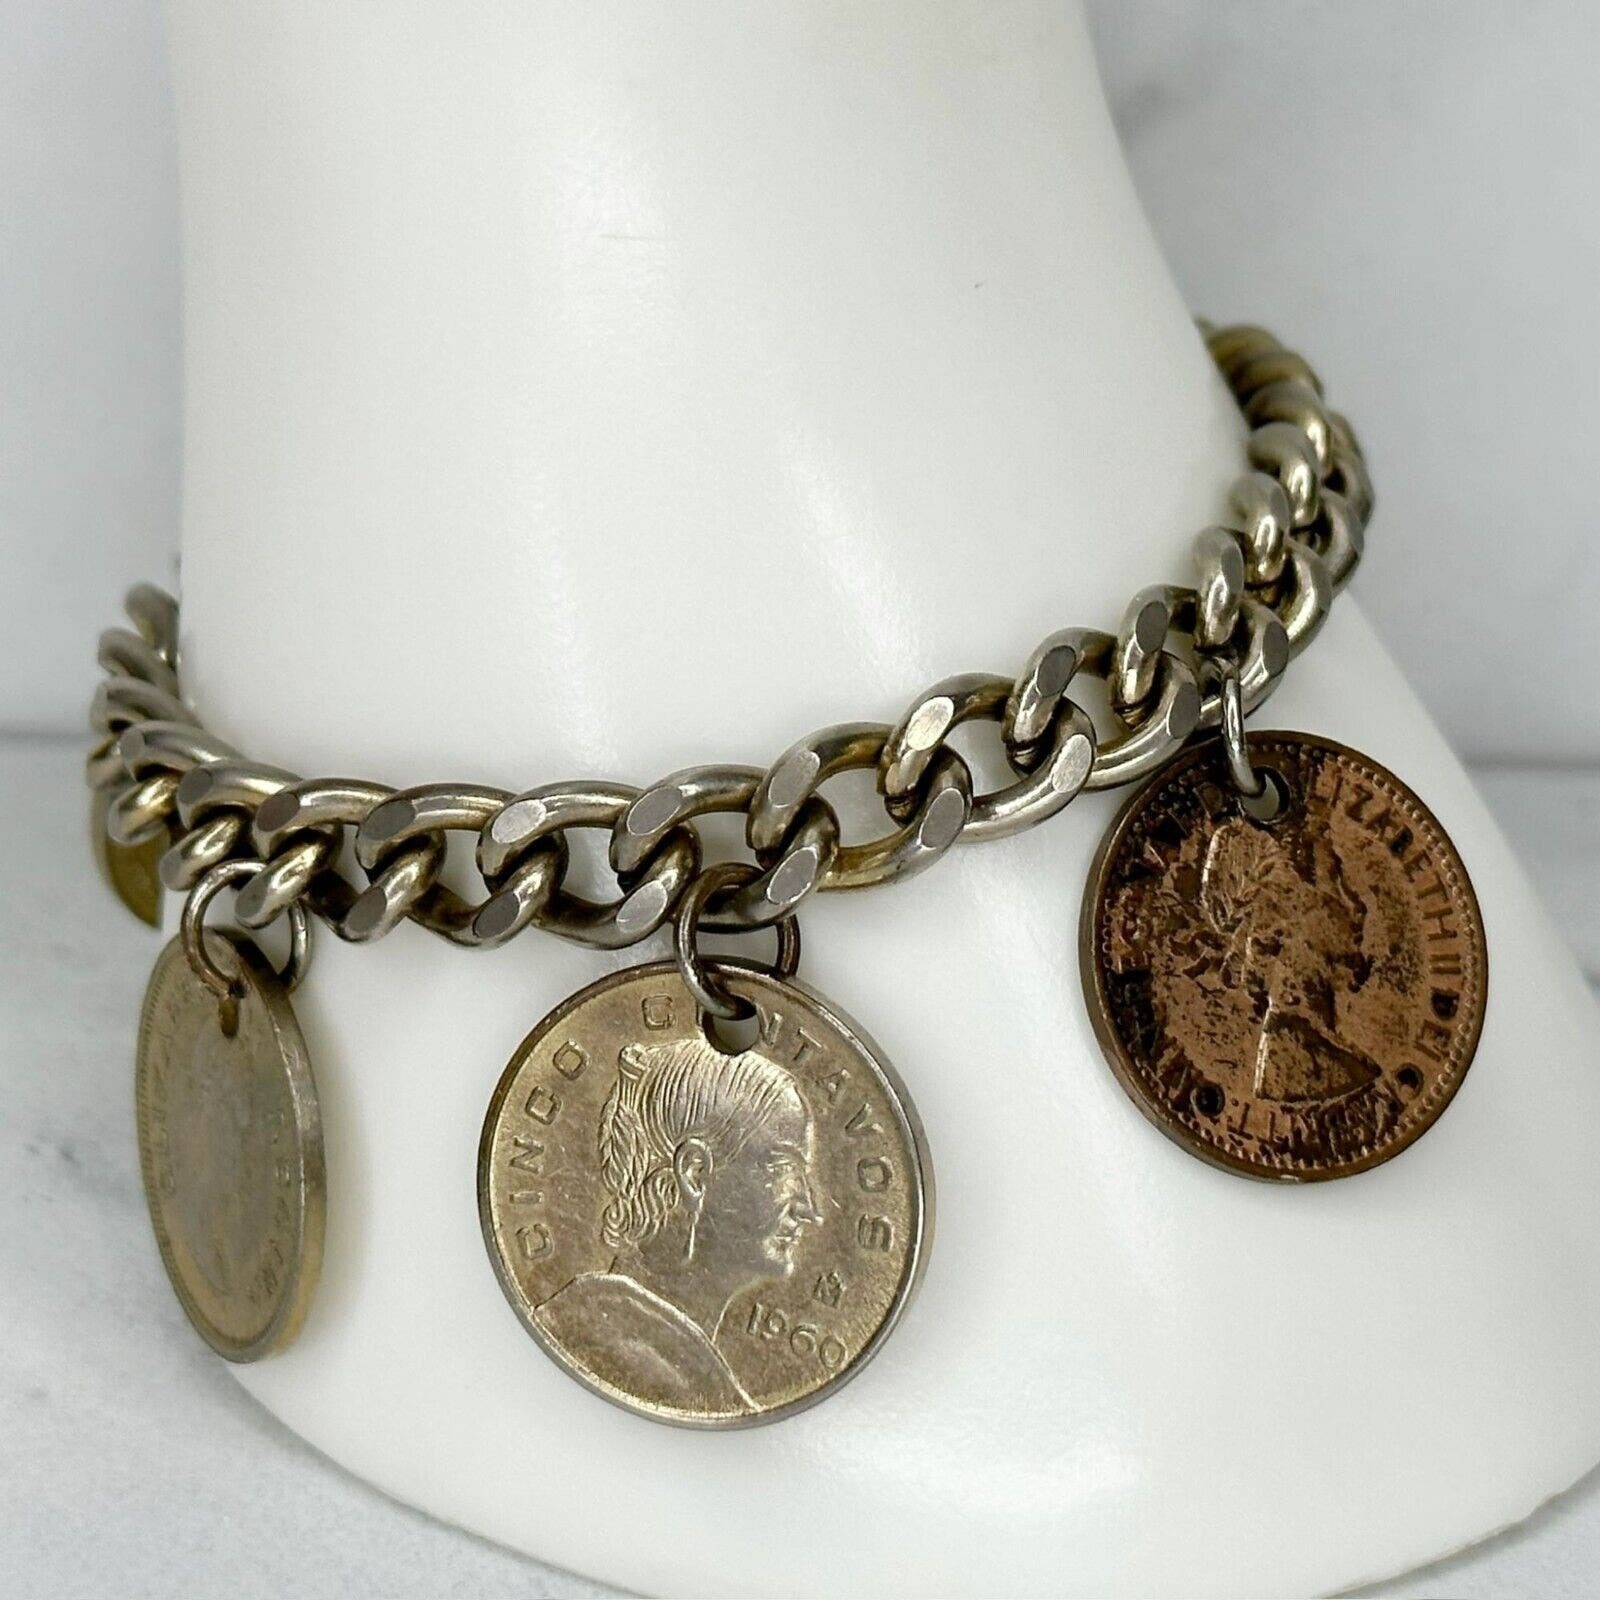 Primary image for Vintage Queen Elizabeth II UK South Africa Mexico Coin Charm Bracelet